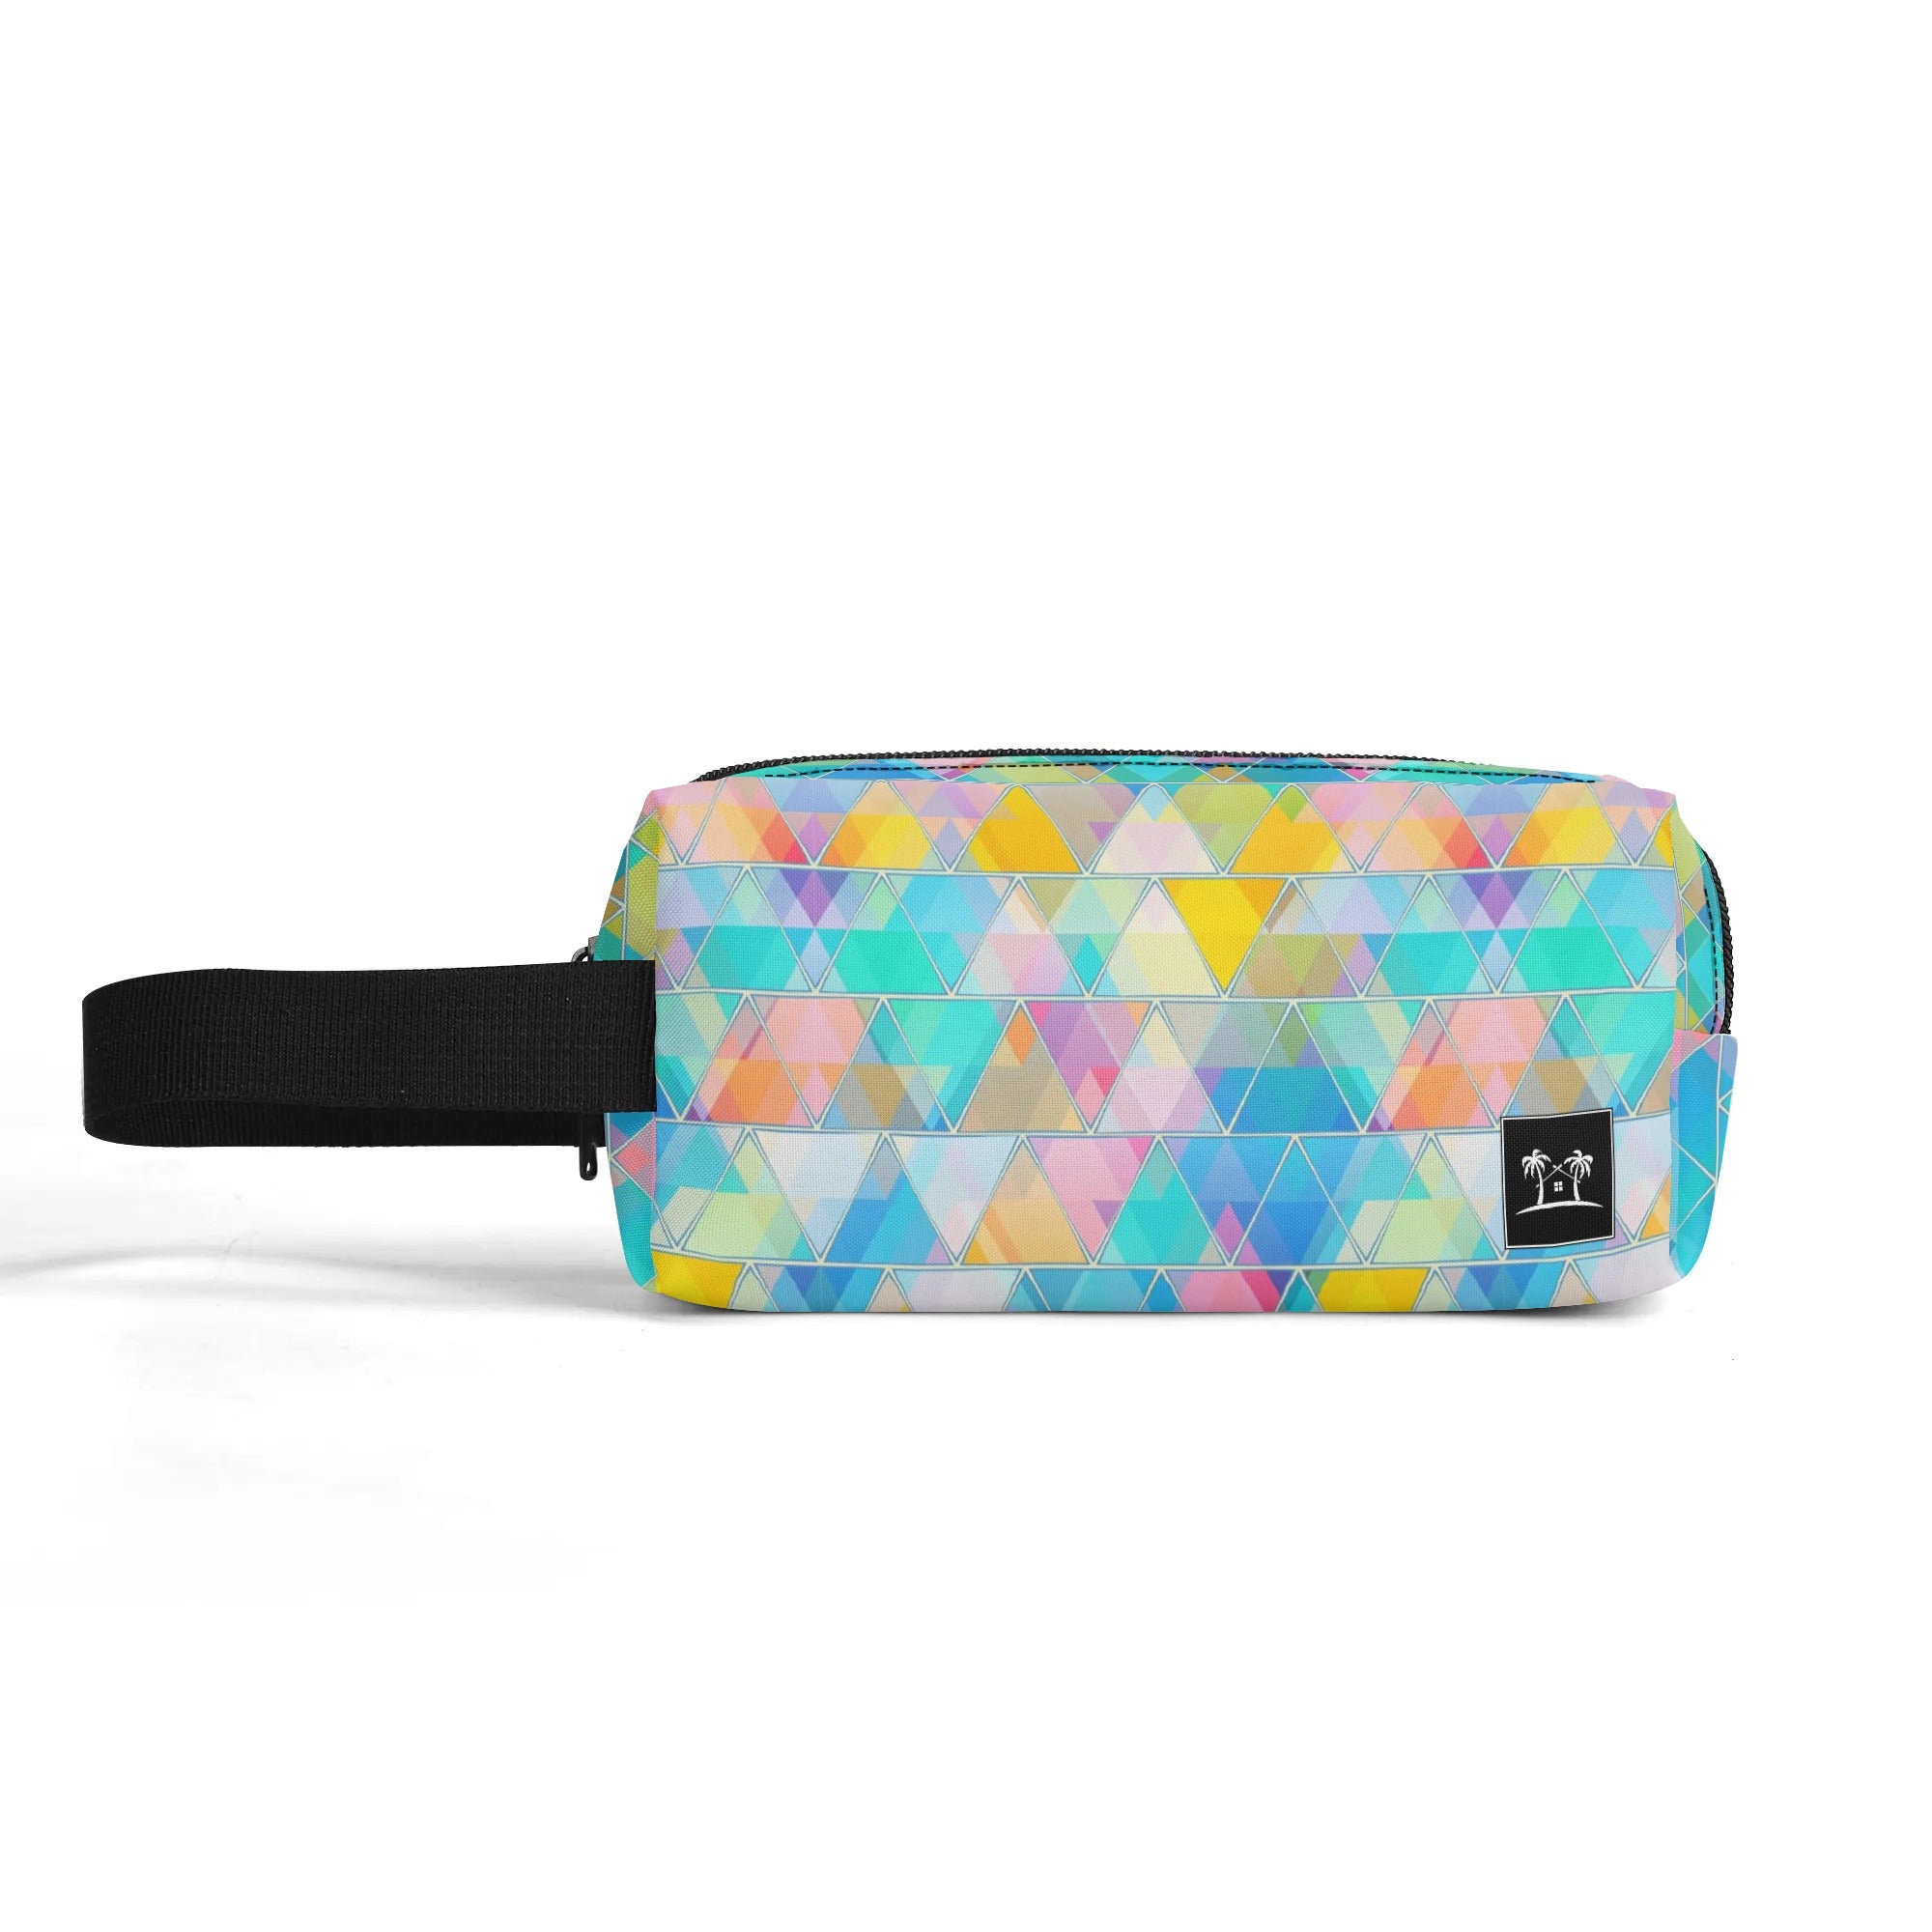 Printed Polyester Wristlet Purse - Pastel Triangles